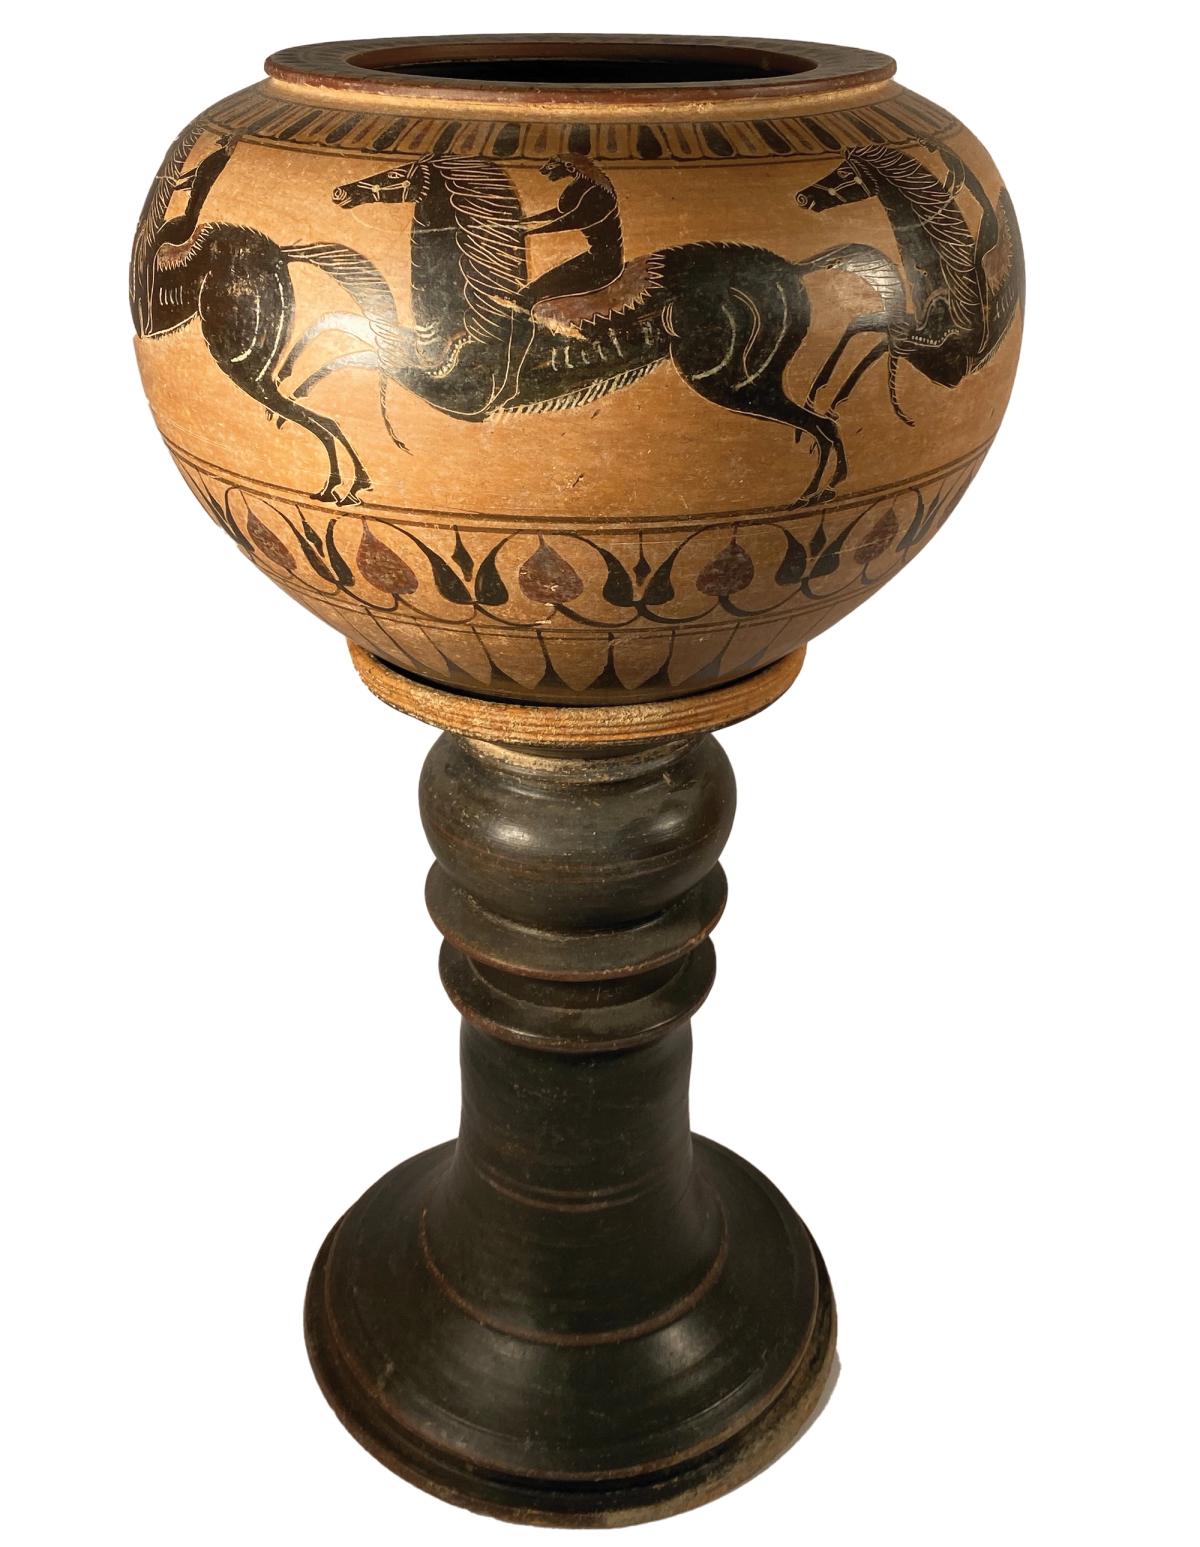 Objects returned to Italy include a Greek dinos mixing bowl, featuring exaggerations that suggest a forgery Carabinieri for the Protection of Cultural Heritage (TPC)